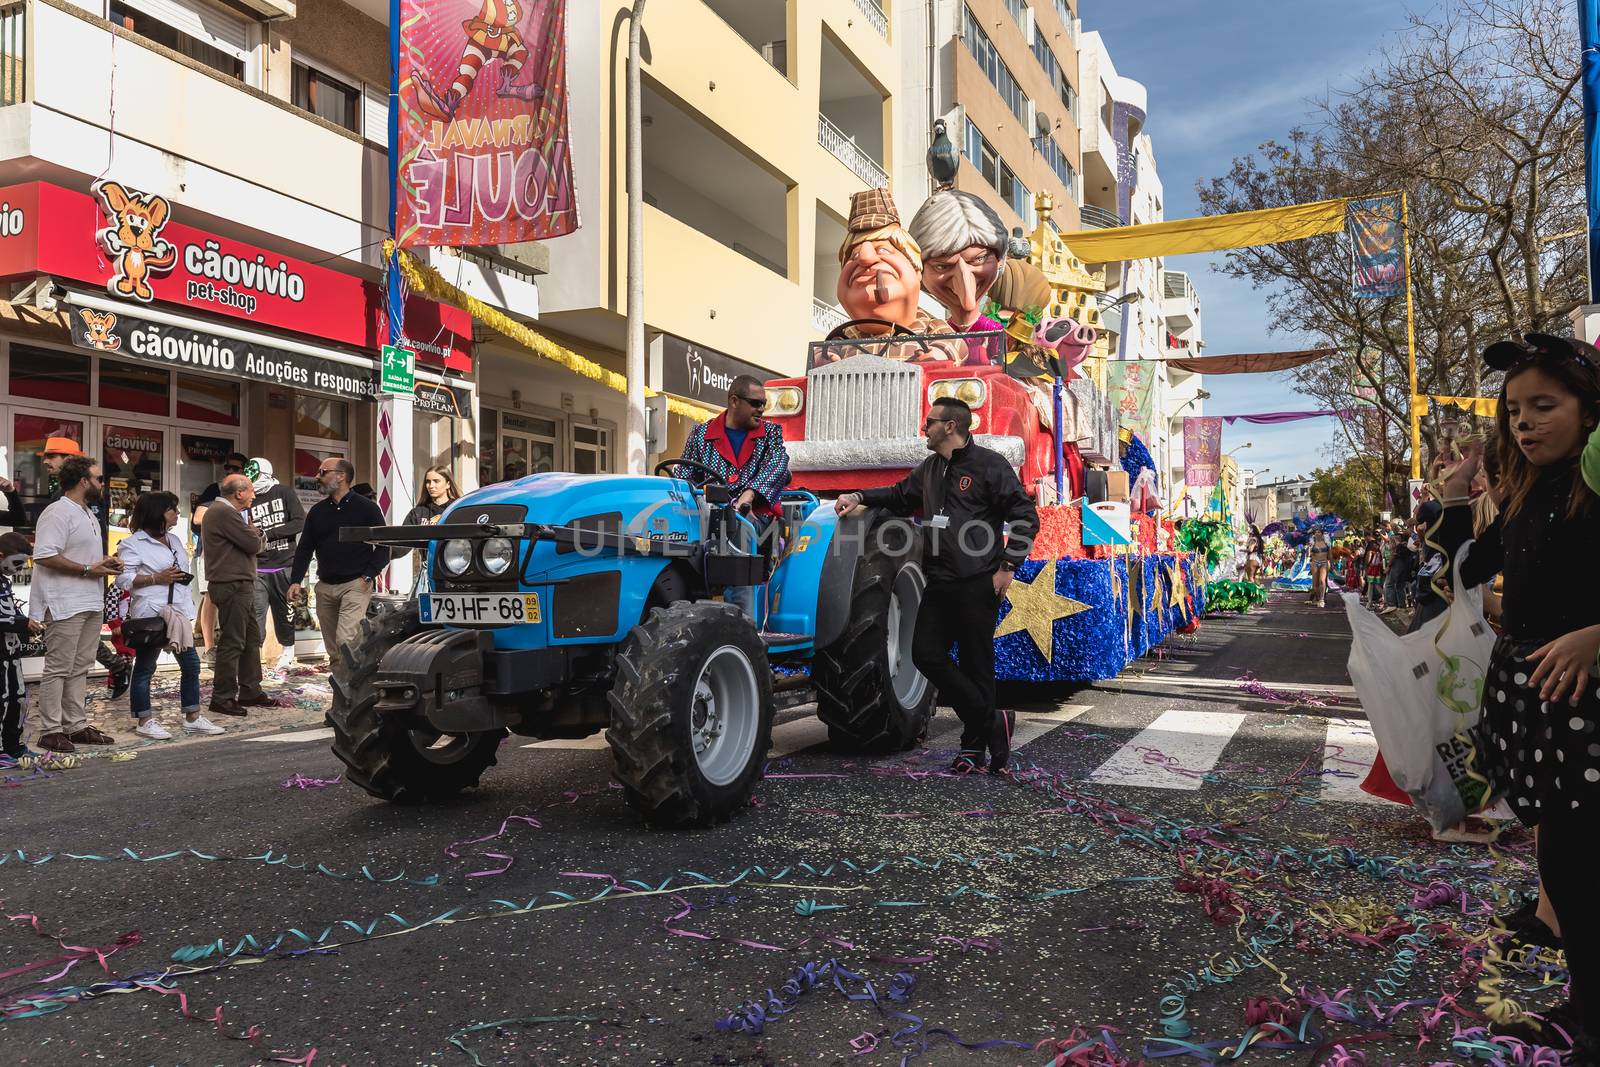 BREXIT float parading in the street in carnival of Loule city, P by AtlanticEUROSTOXX